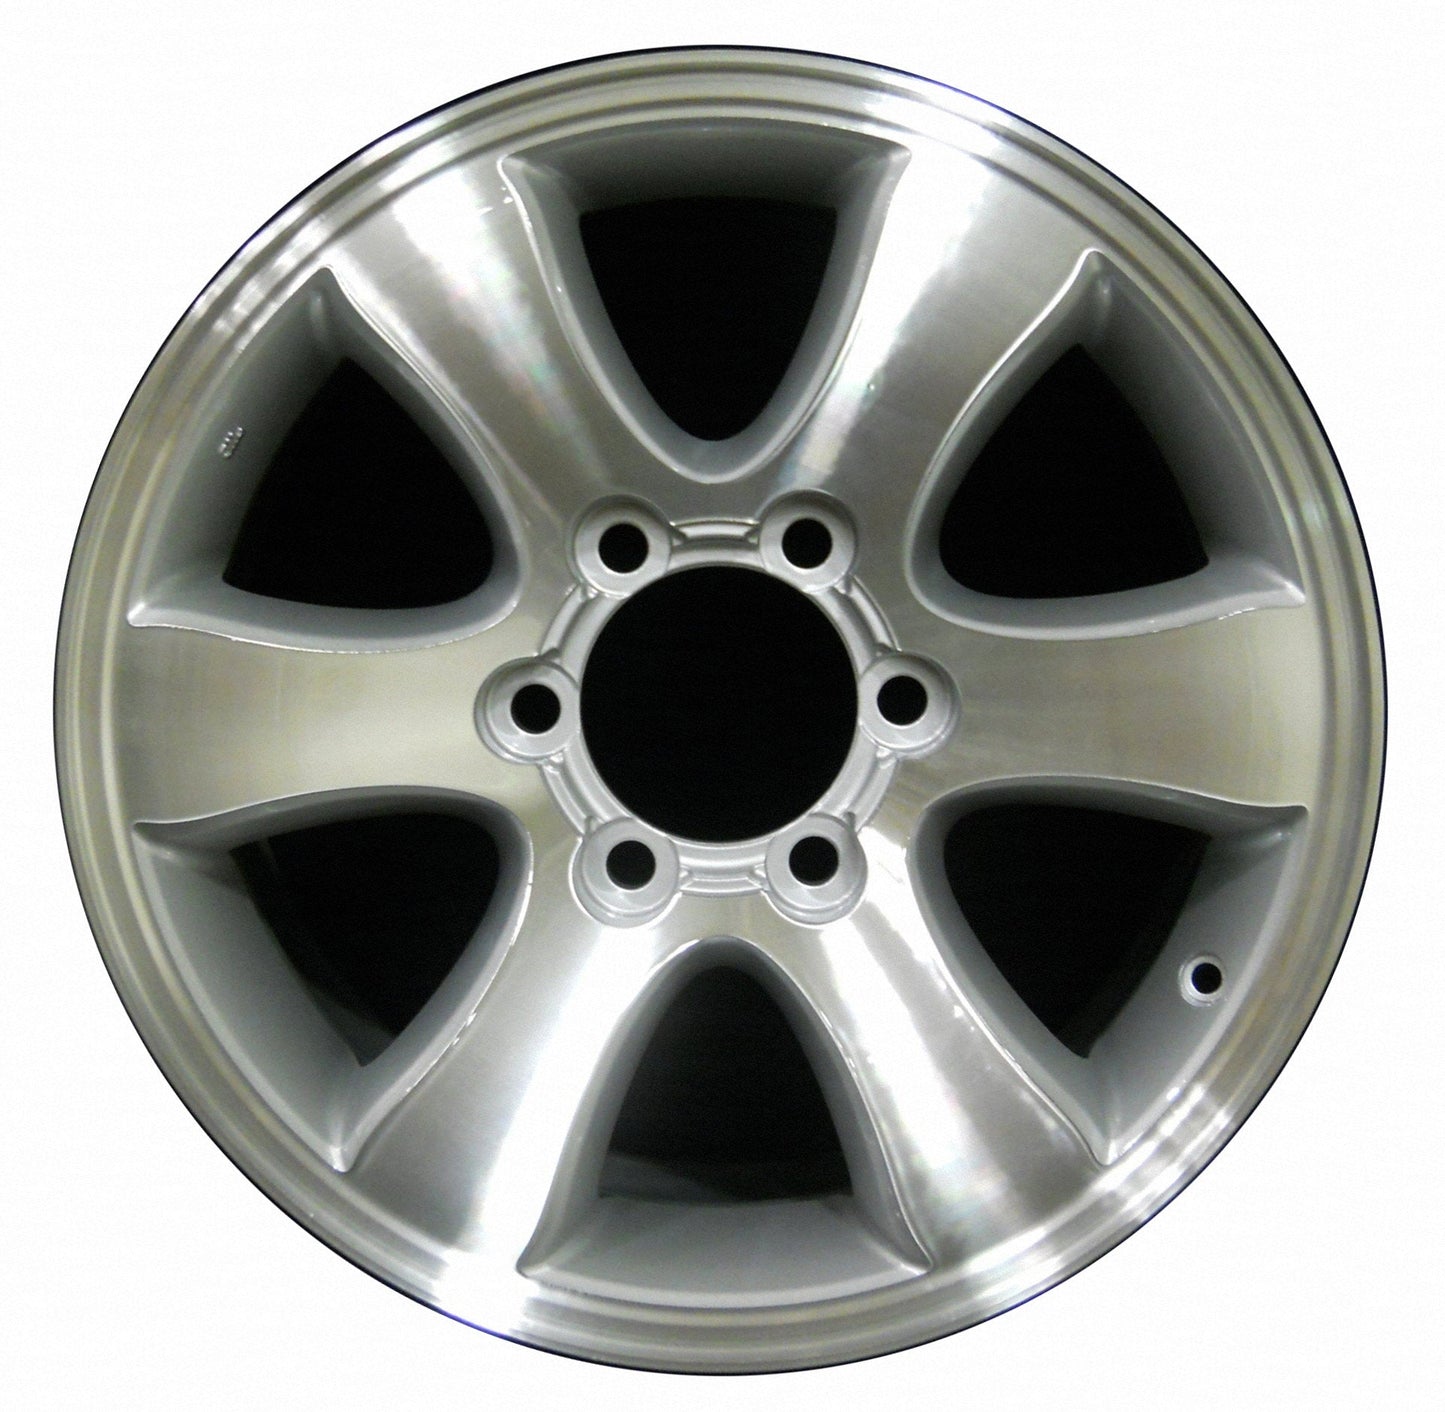 Toyota 4 Runner  2003, 2004, 2005, 2006, 2007, 2008, 2009 Factory OEM Car Wheel Size 17x7.5 Alloy WAO.69430.PS07.MA